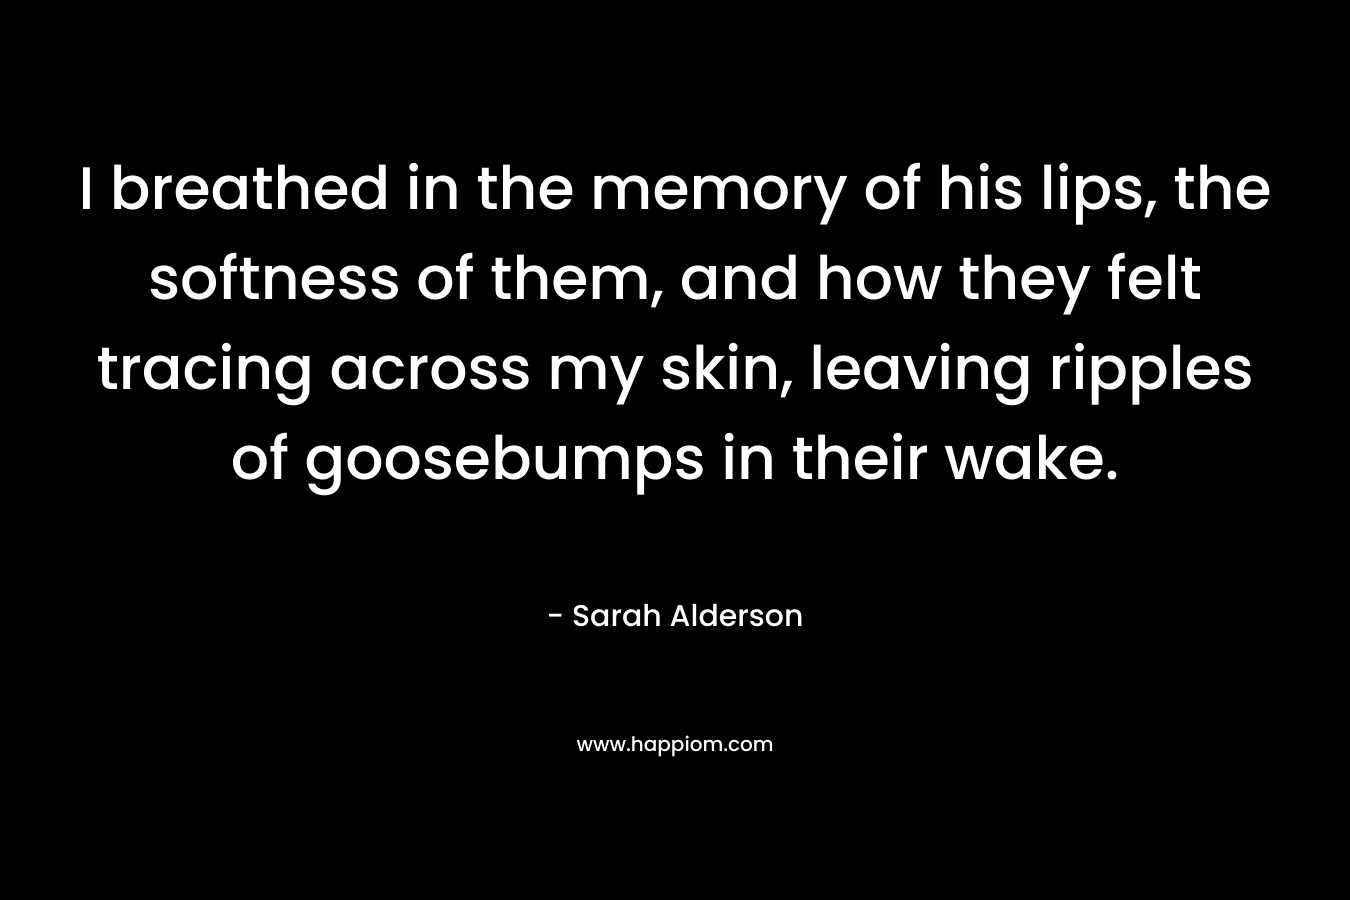 I breathed in the memory of his lips, the softness of them, and how they felt tracing across my skin, leaving ripples of goosebumps in their wake. – Sarah Alderson